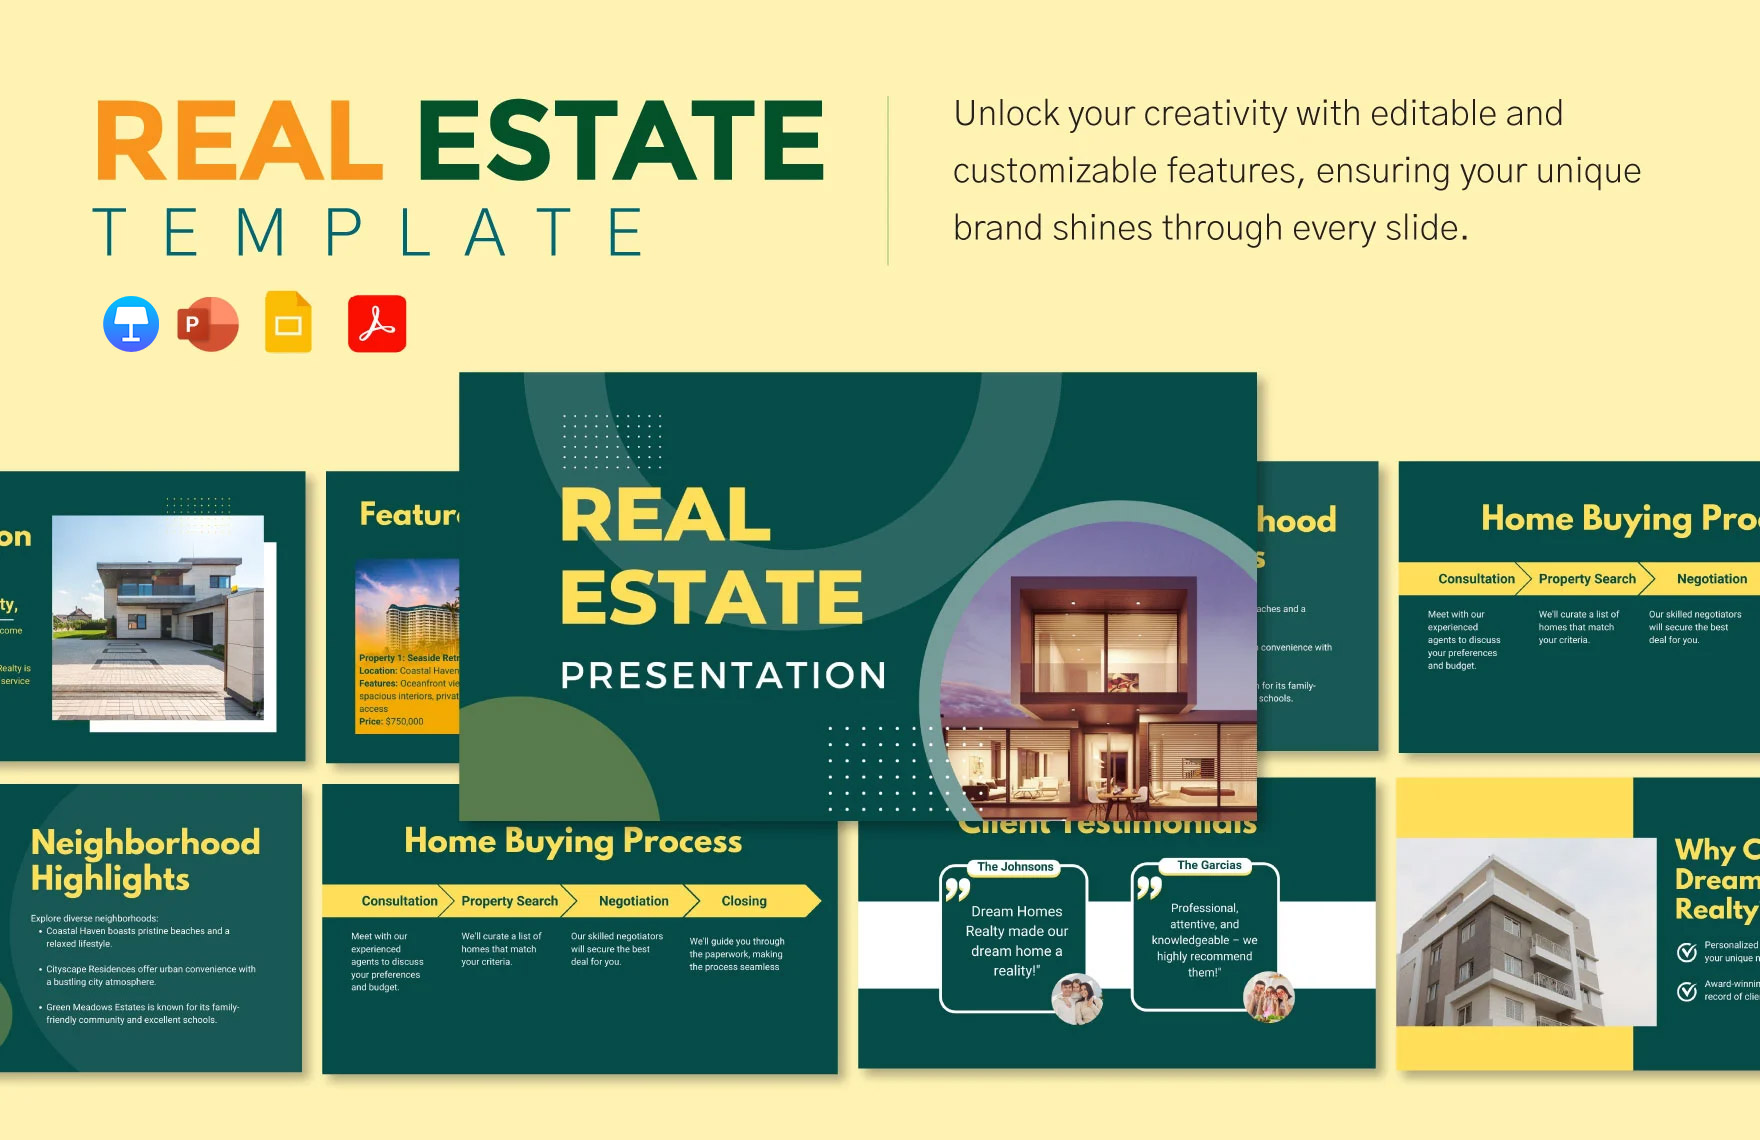 Real Estate Template